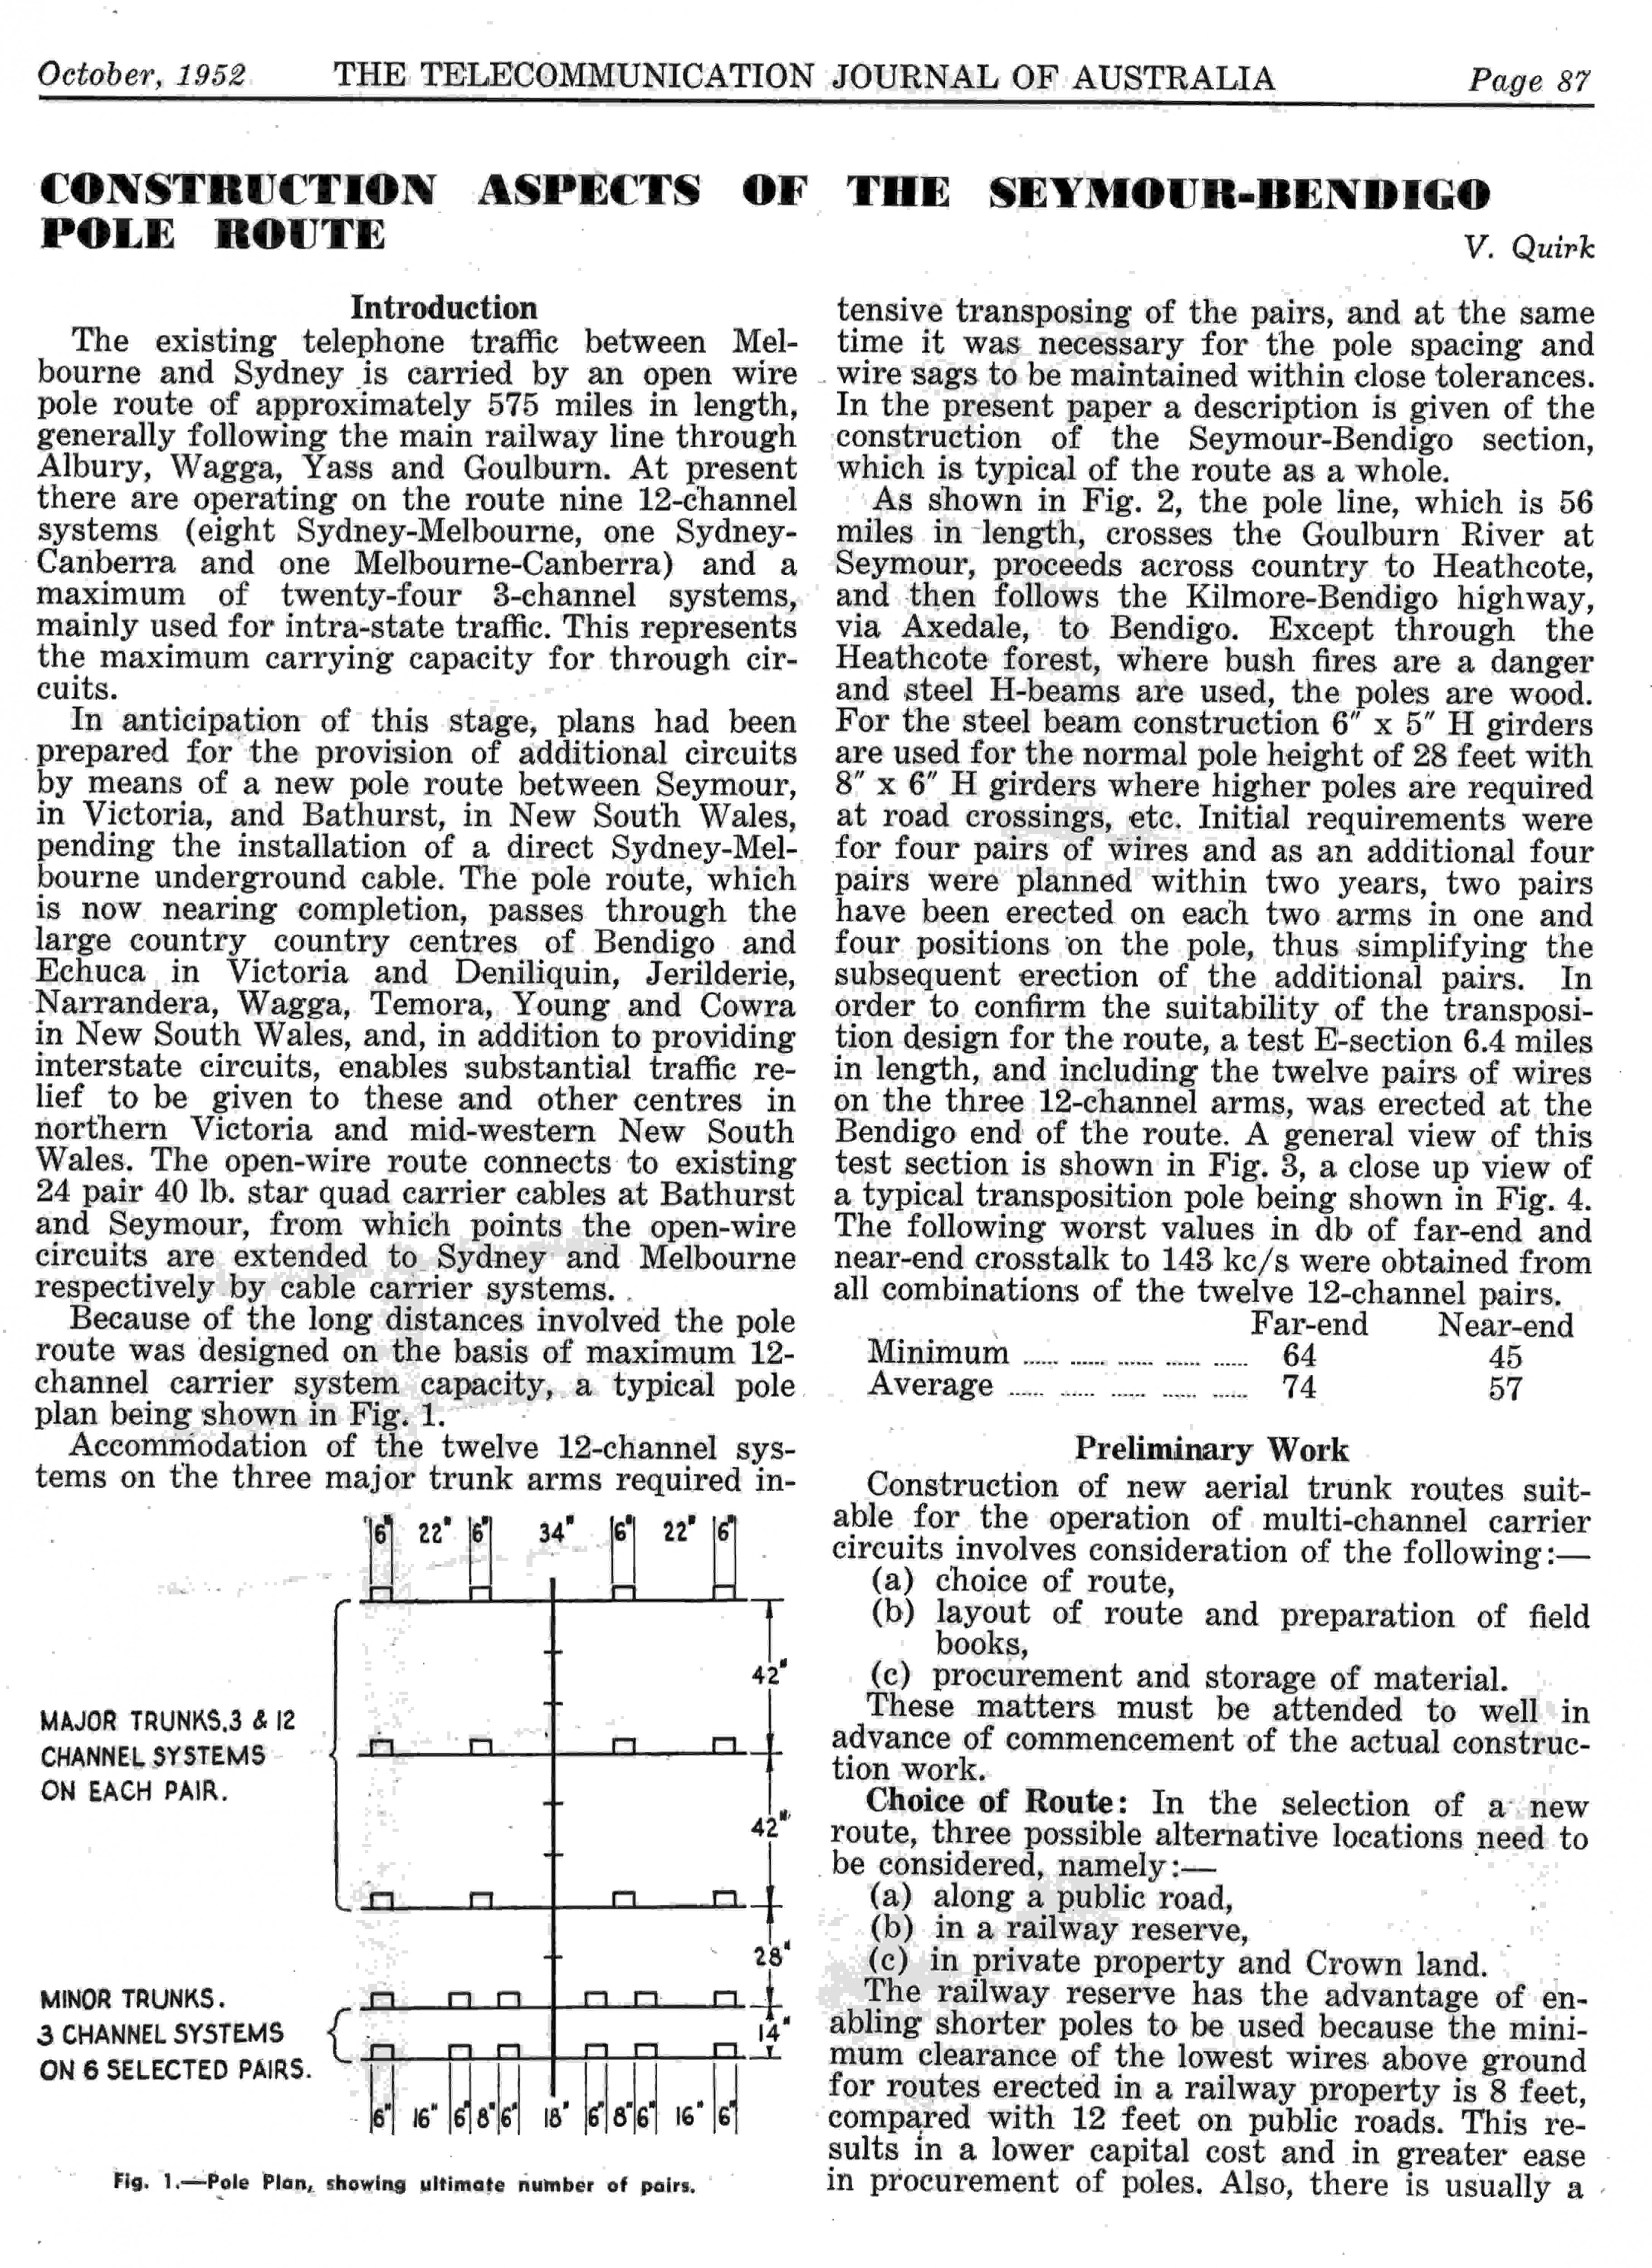 First page of Historical Paper